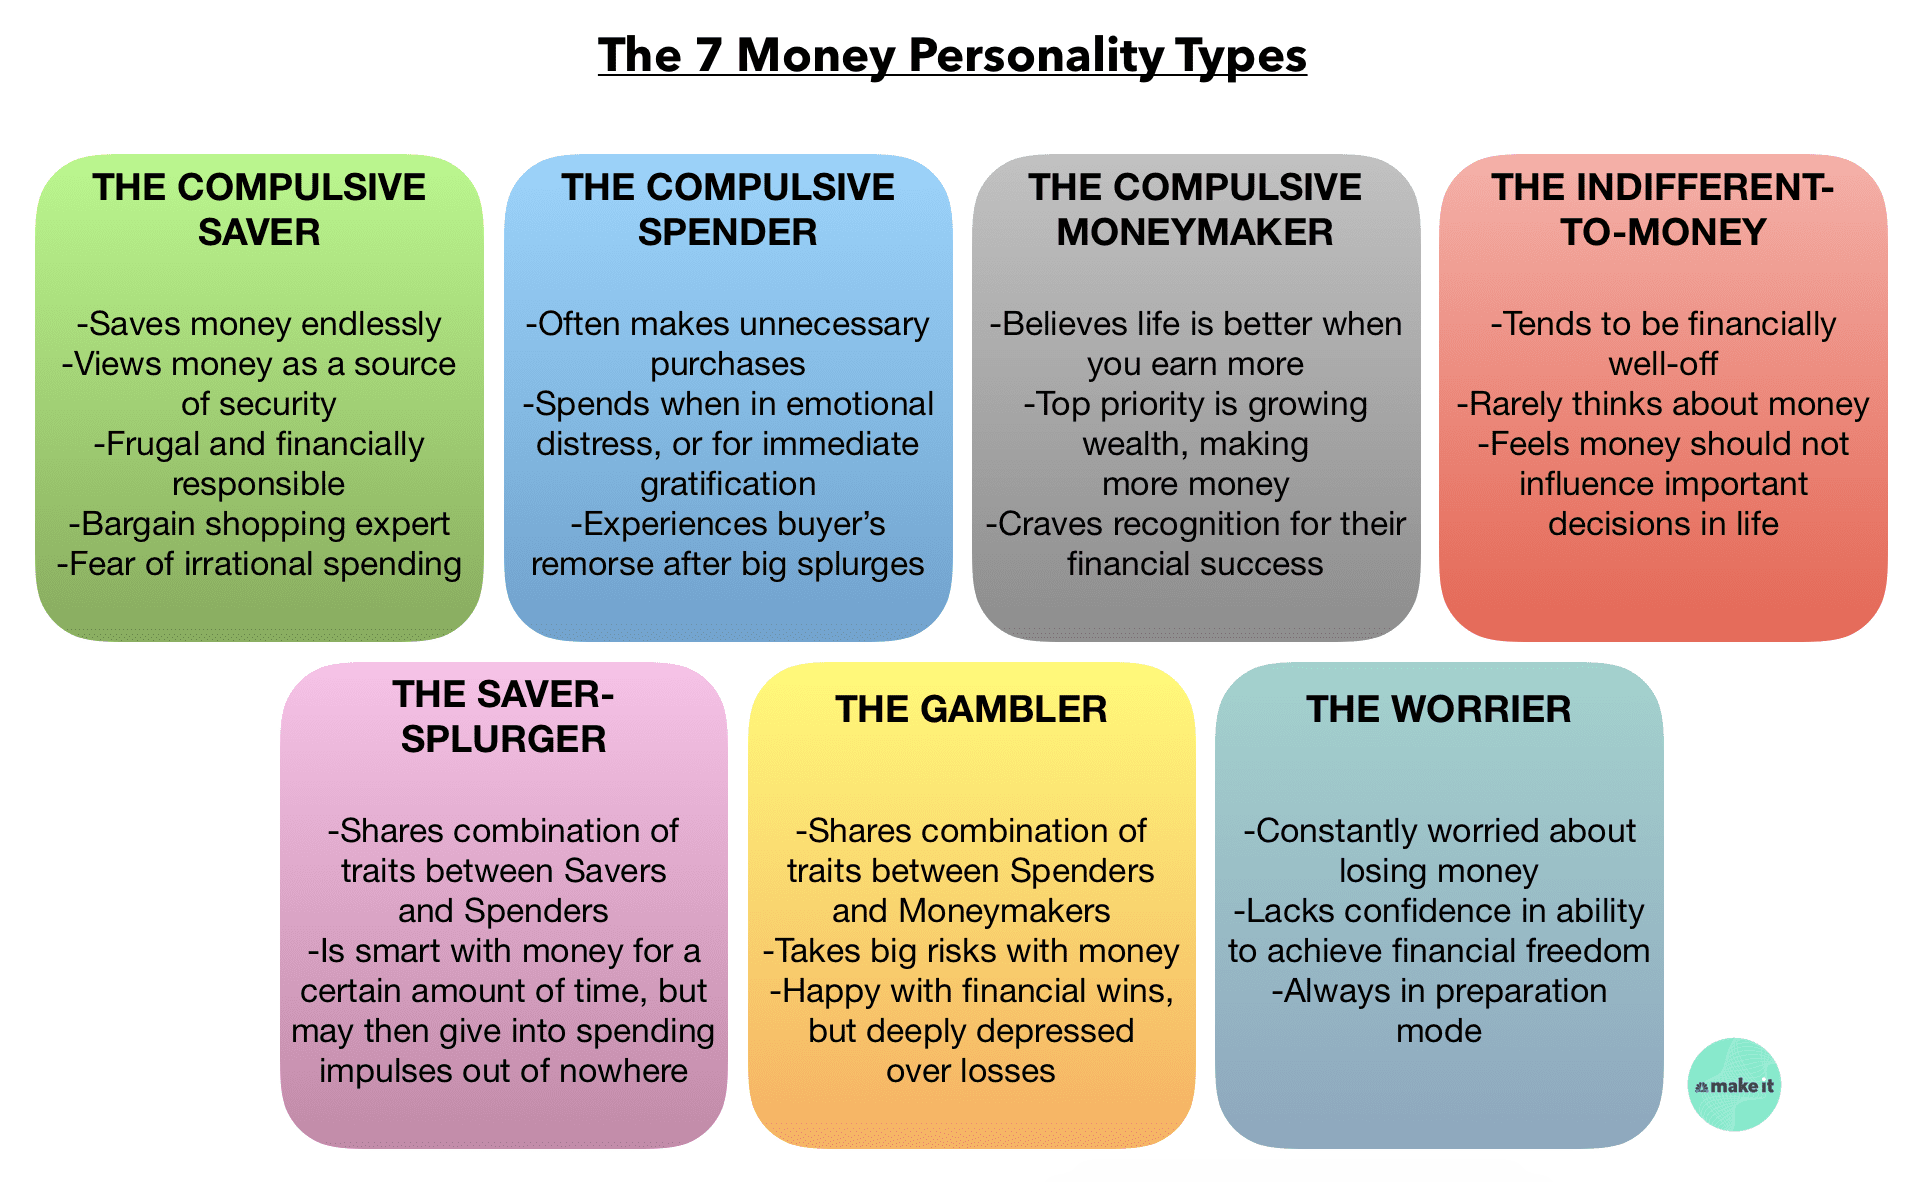 There are 7 money personality types, says psychology expert. Which